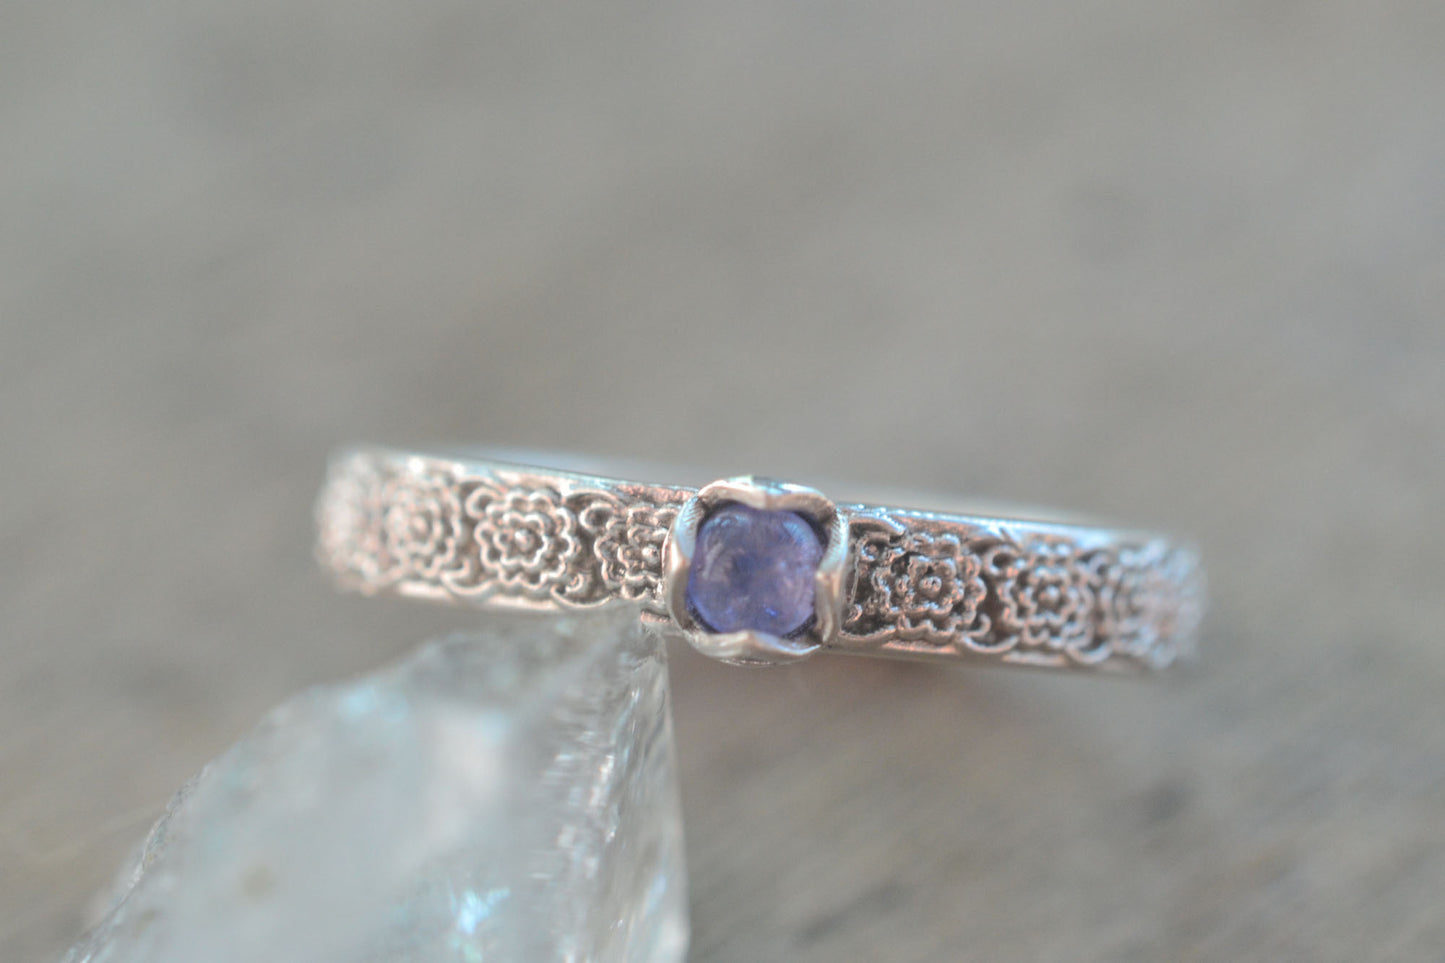 3mm Tanzanite Ring in Flower Patterned Silver